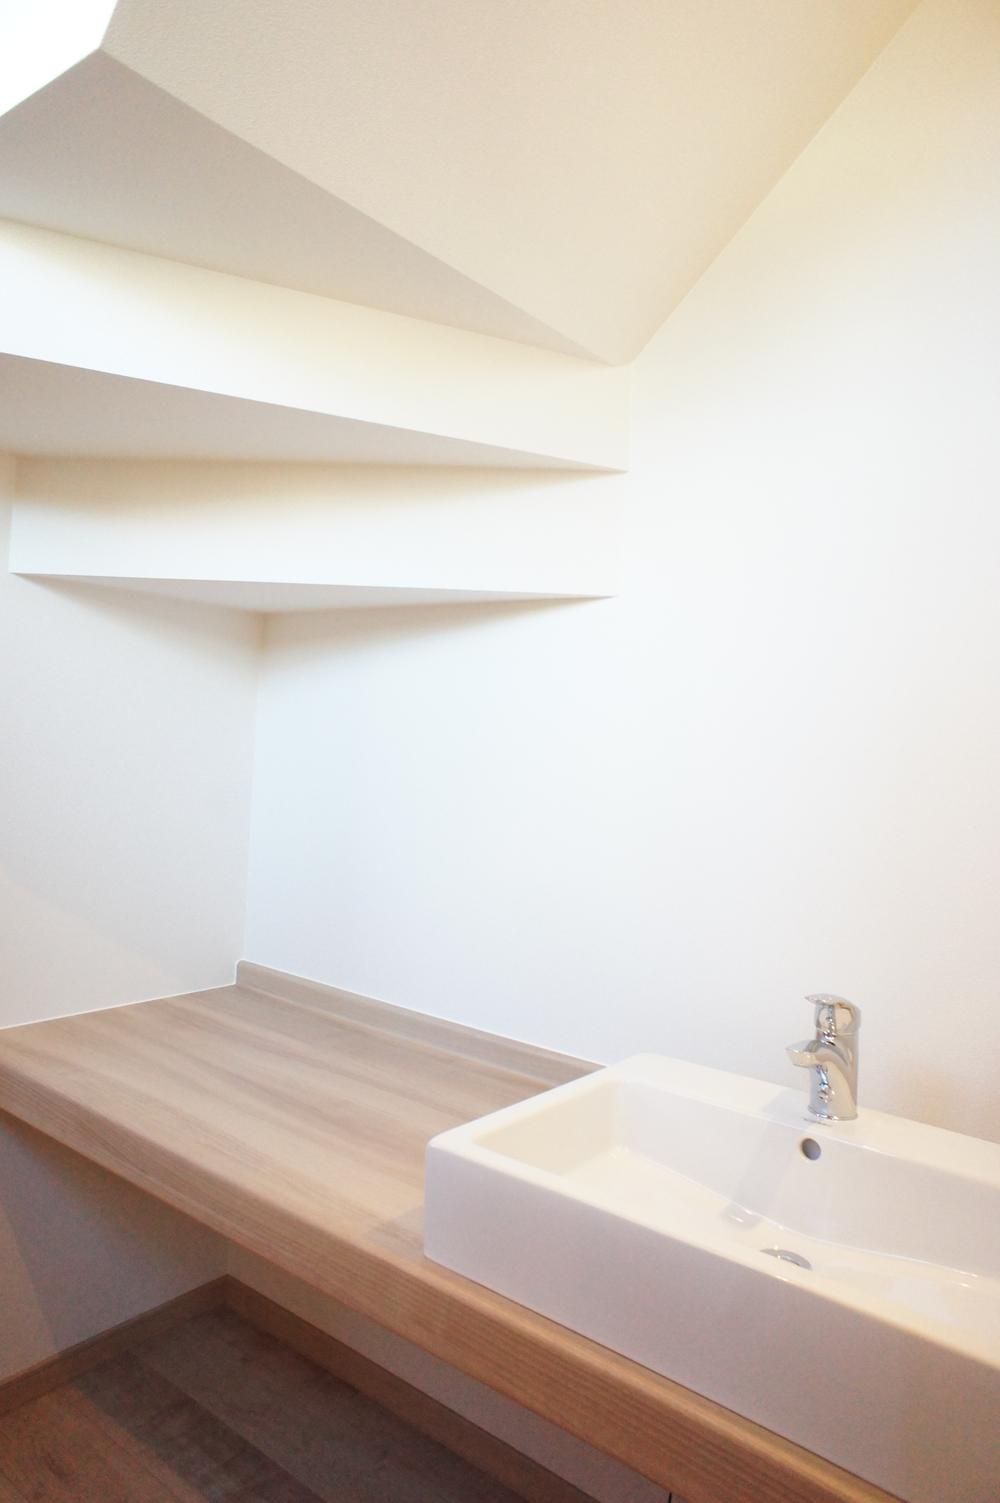 Other. Utilizing the space under the stairs, Entrance direct connection of hand washing counter